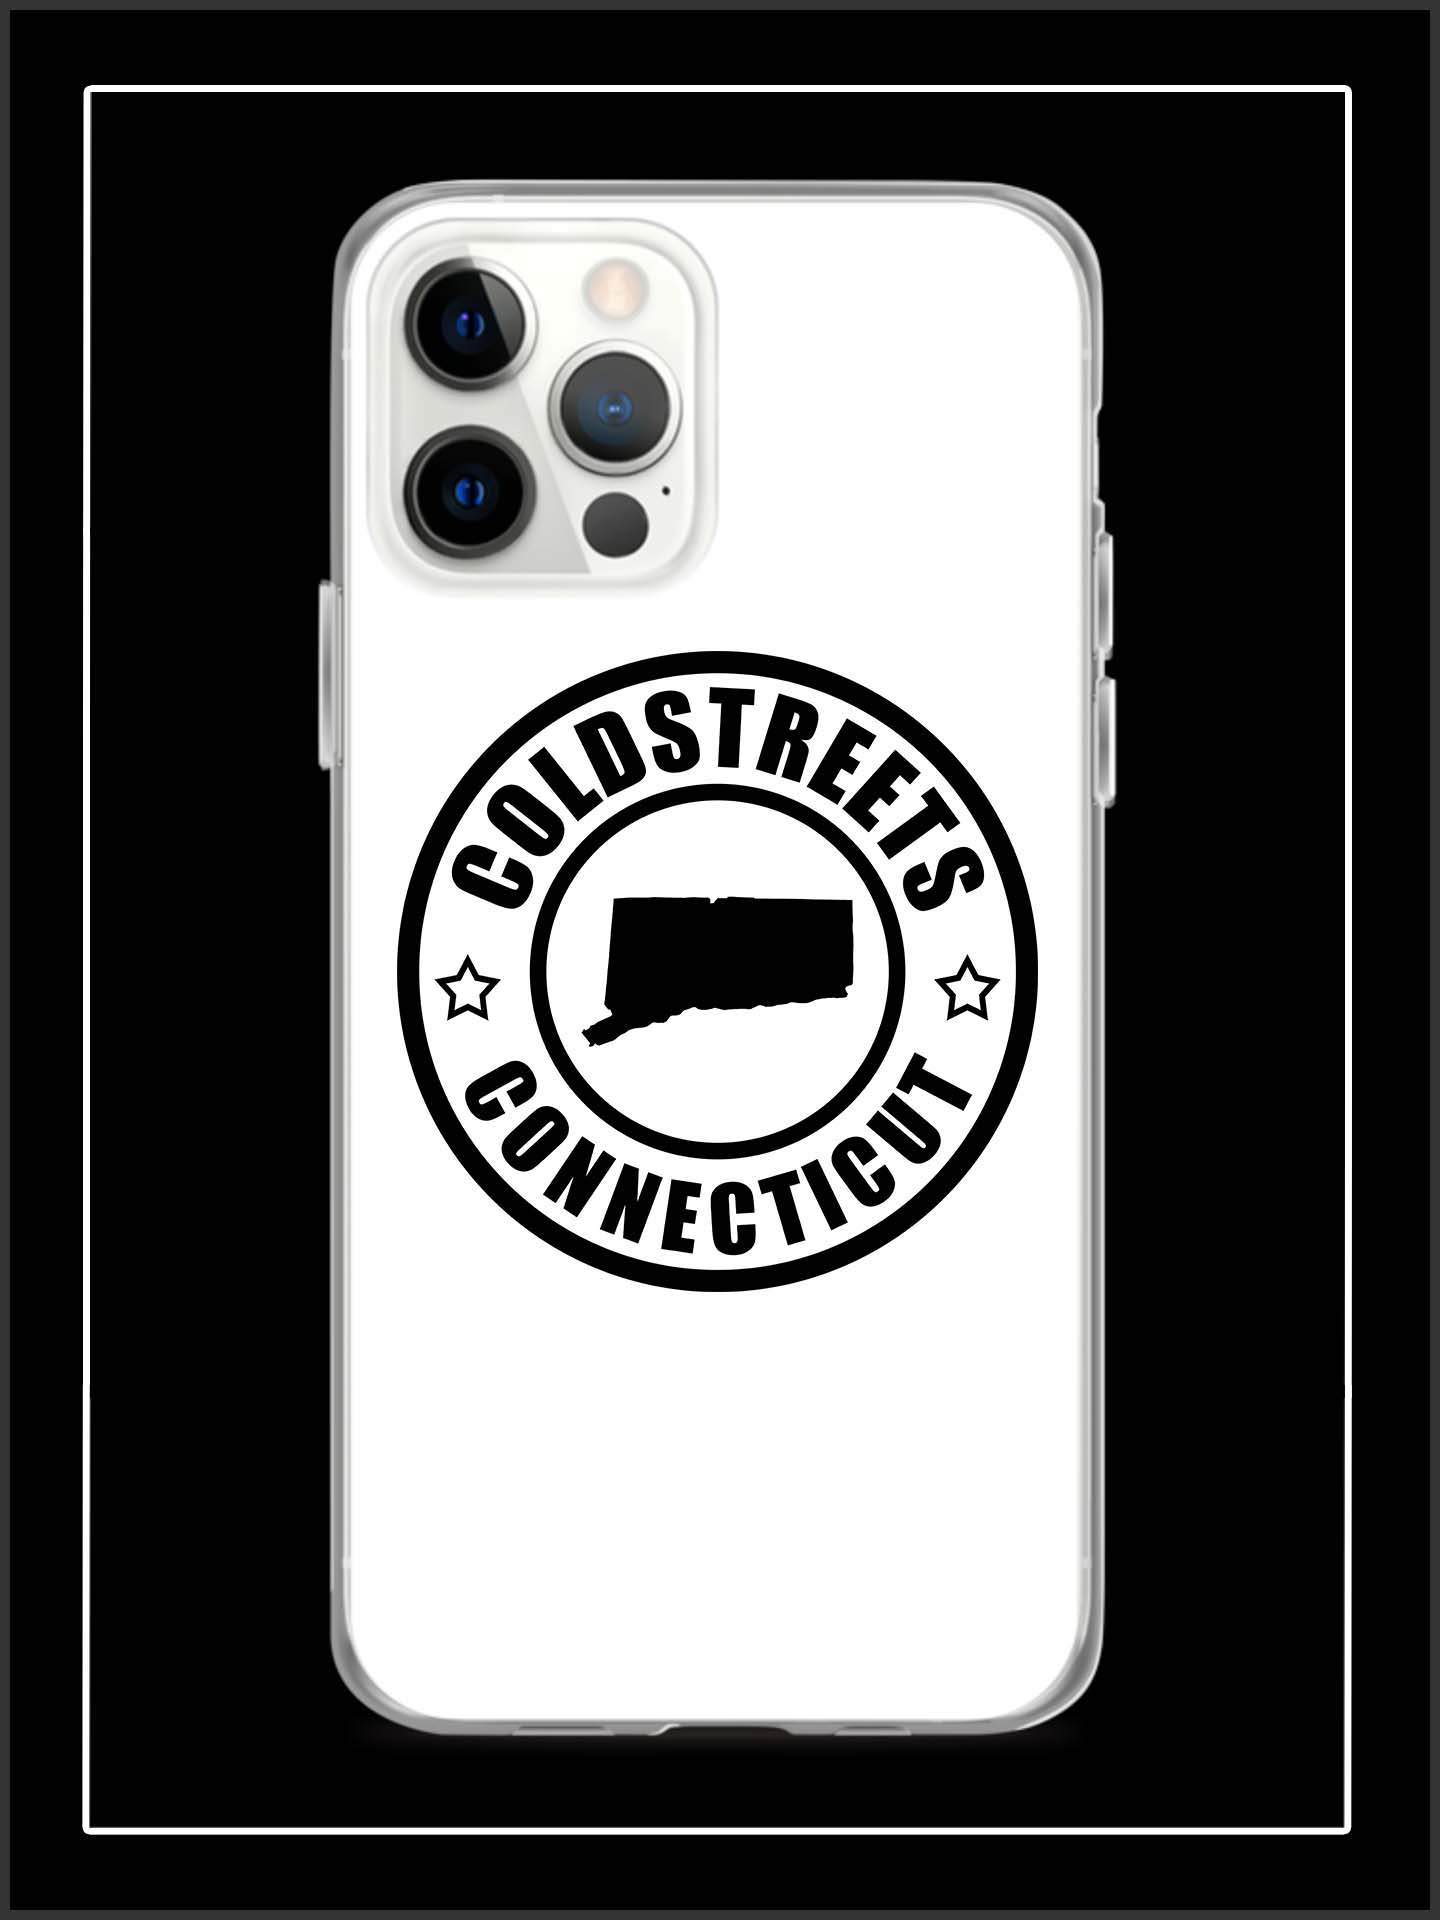 Cold Streets Connecticut iPhone Cases